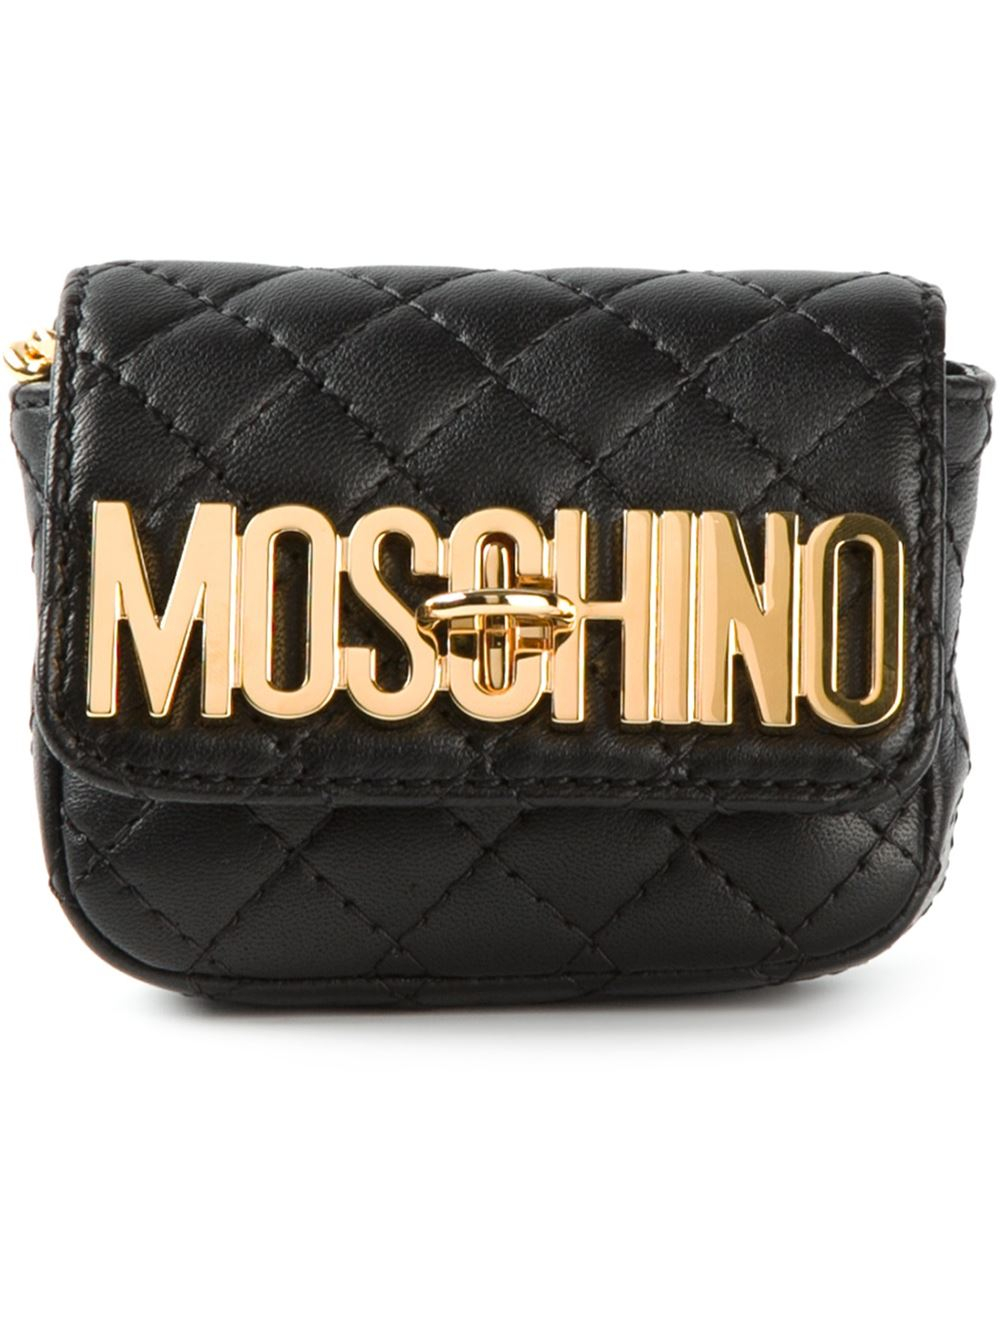 Moschino Mini Quilted Cross Body Bag in Black | Lyst